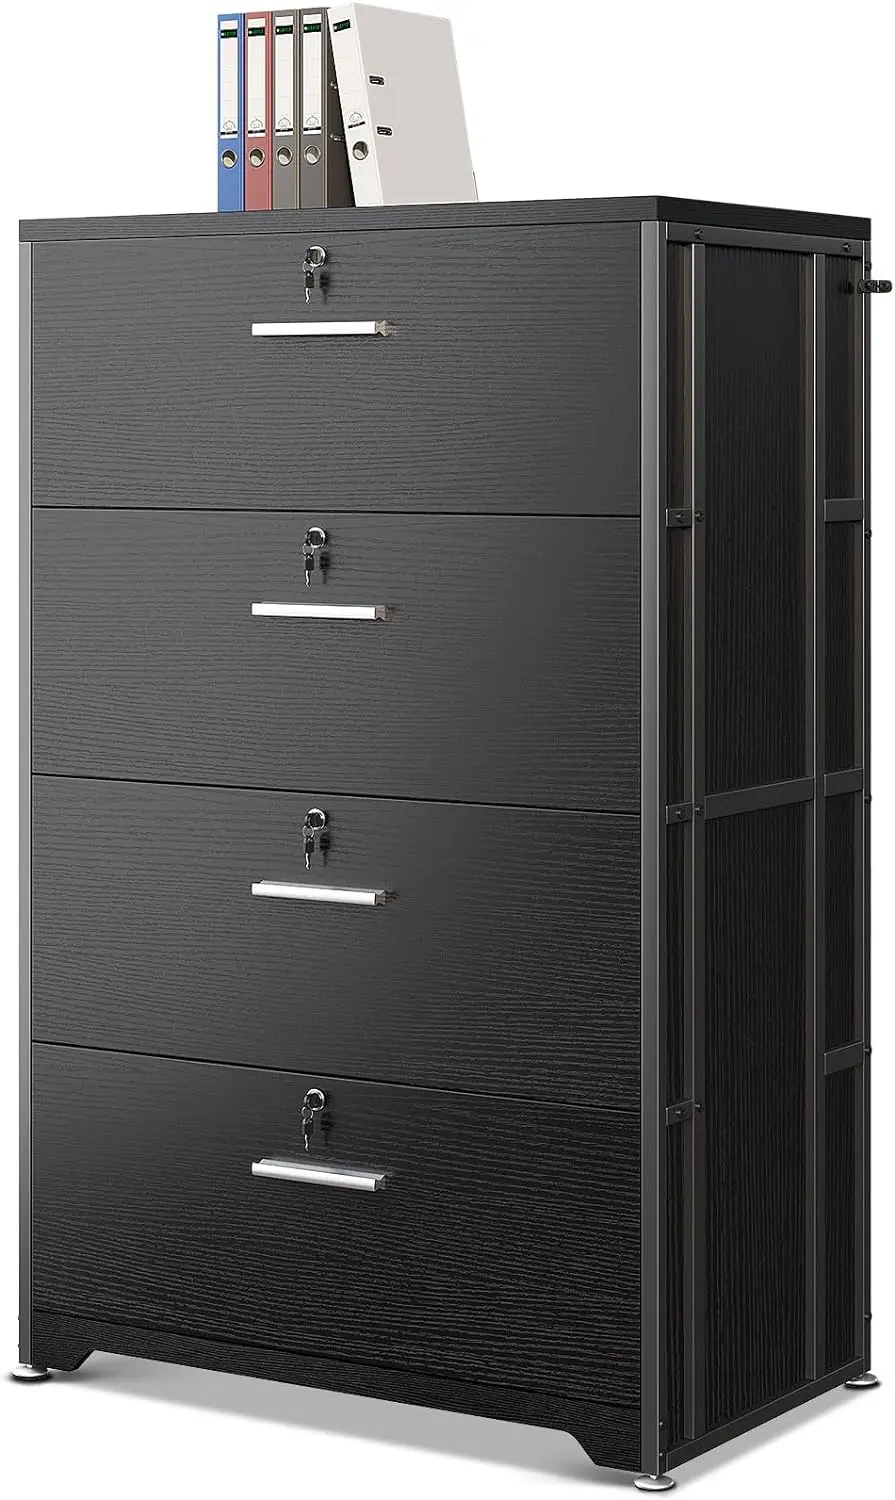 AODK File Cabinet Filing Cabinet for Home Office, Large File Cabinets with Lock, Office Storage Cabinet 4 Drawer for Legal/Lette